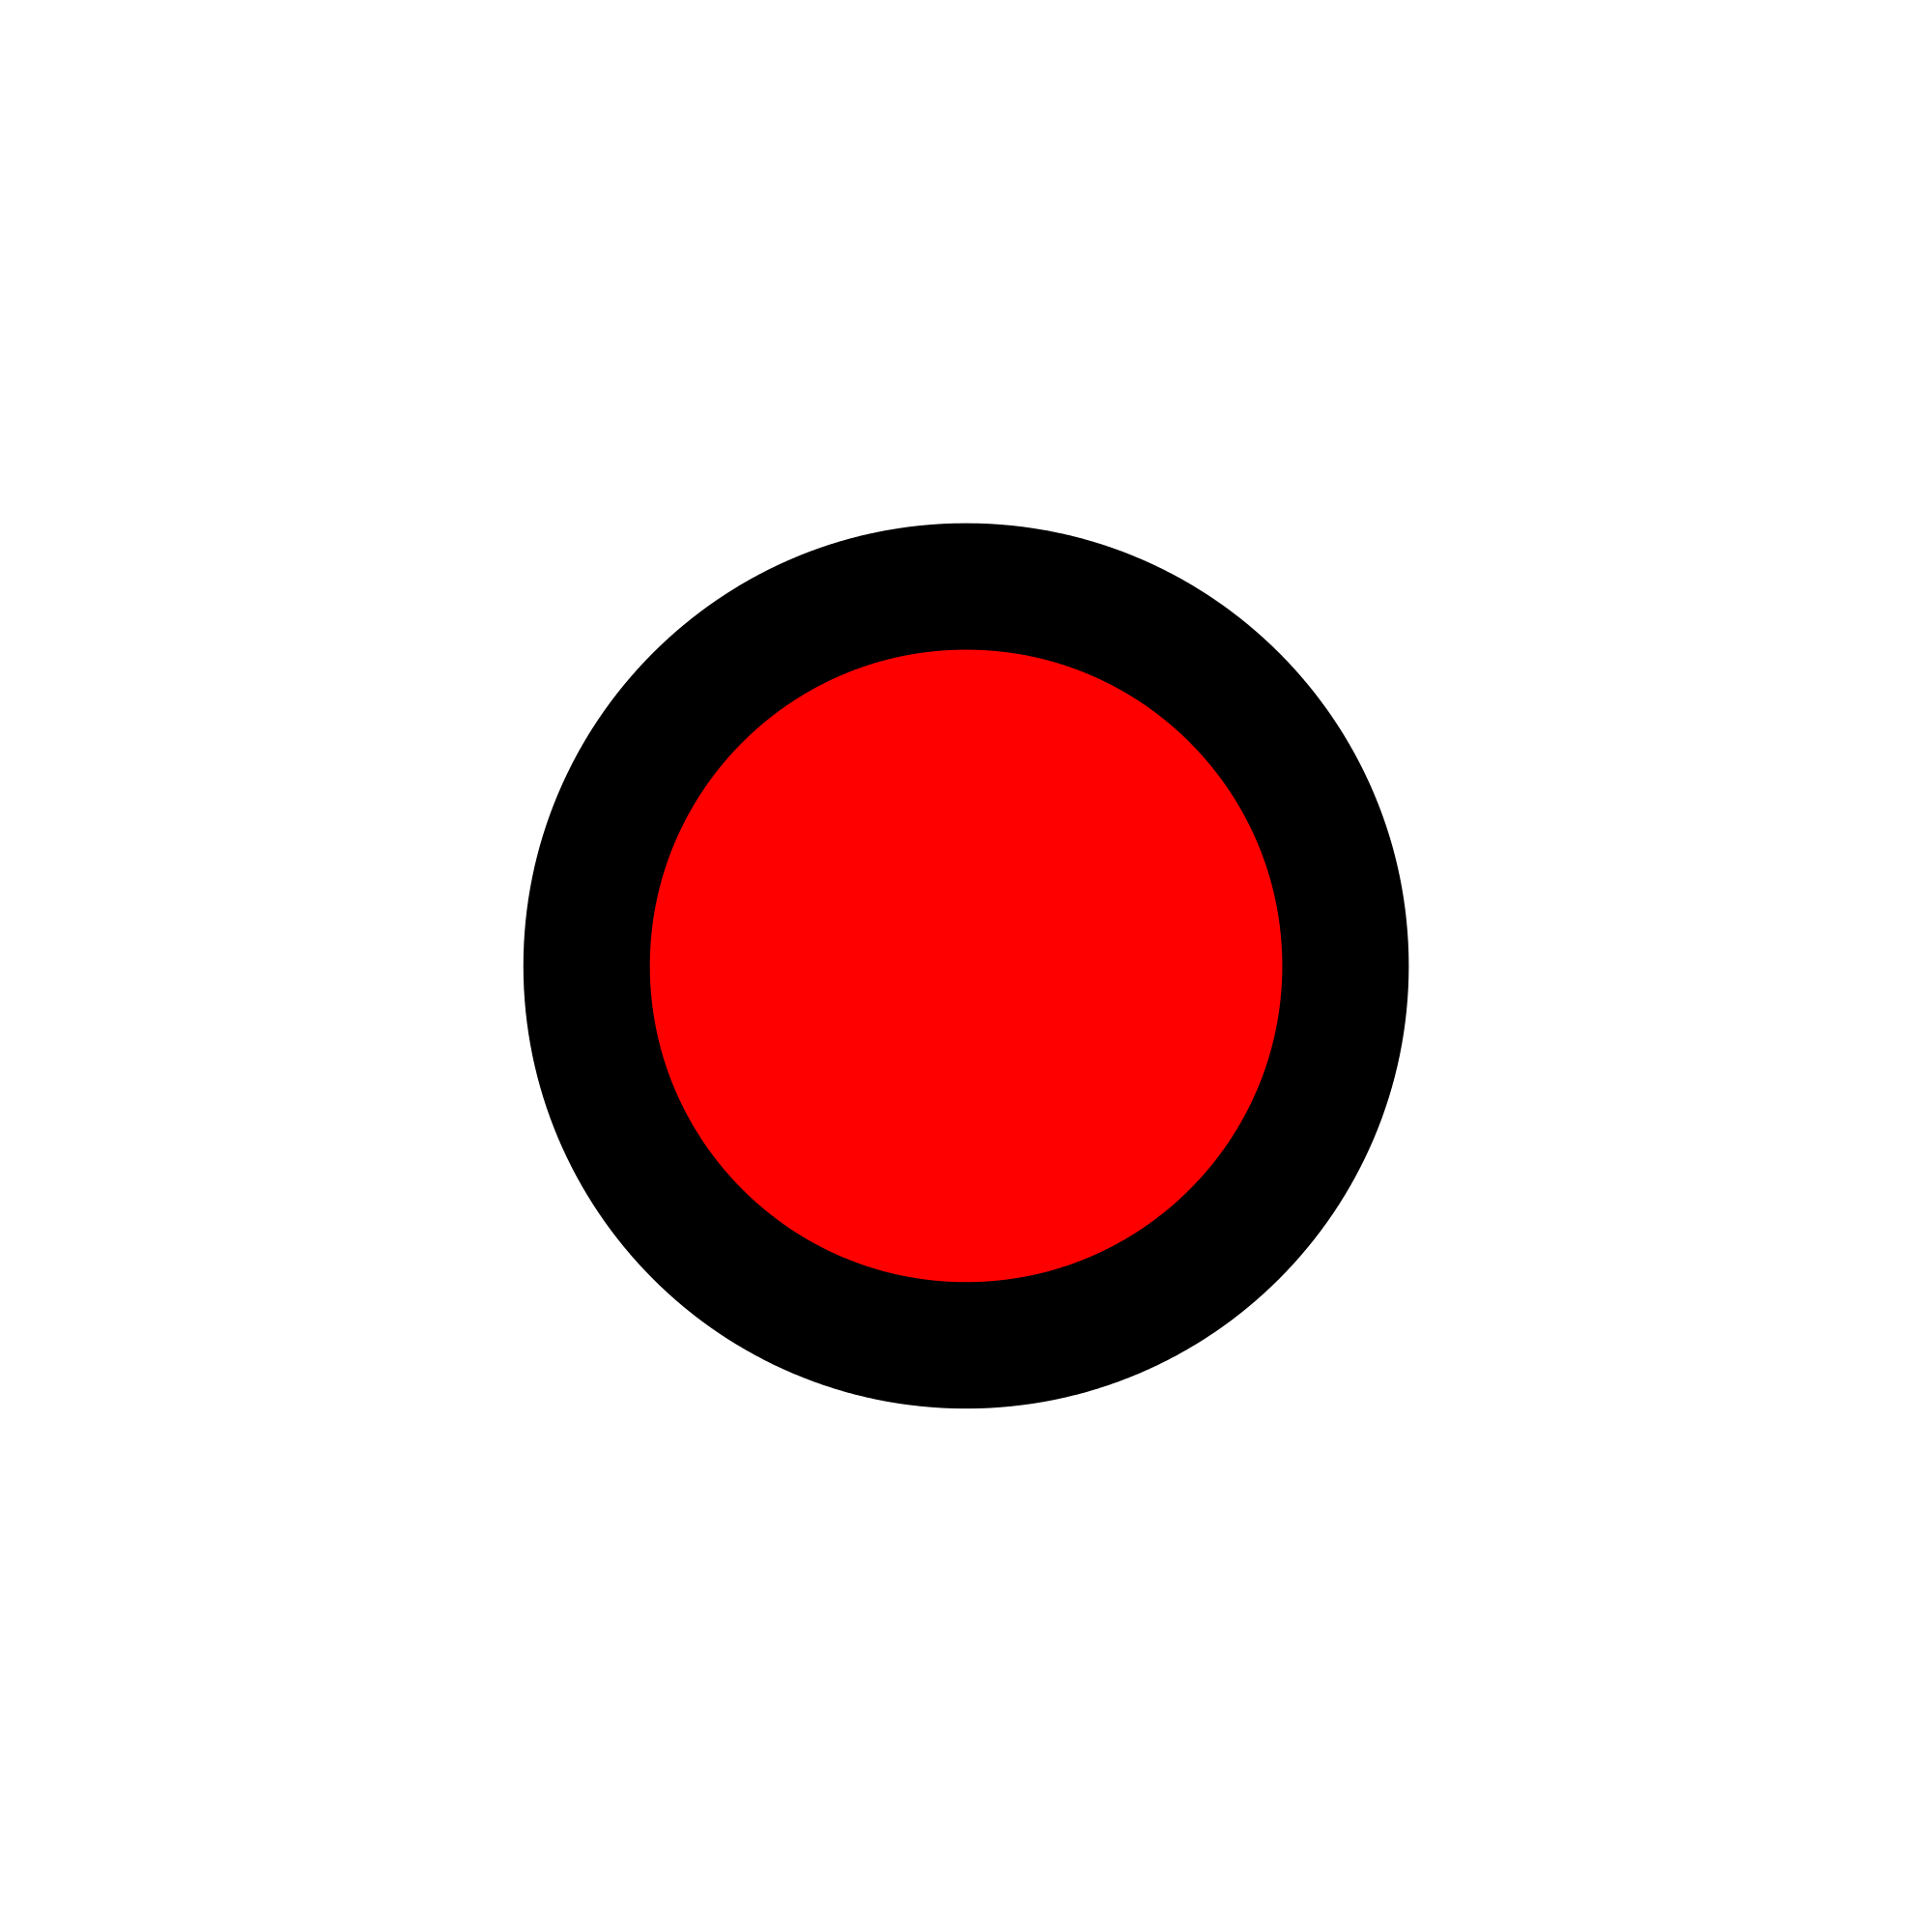 Blue and Red Dot Logo - File:City locator 14.svg - Wikimedia Commons